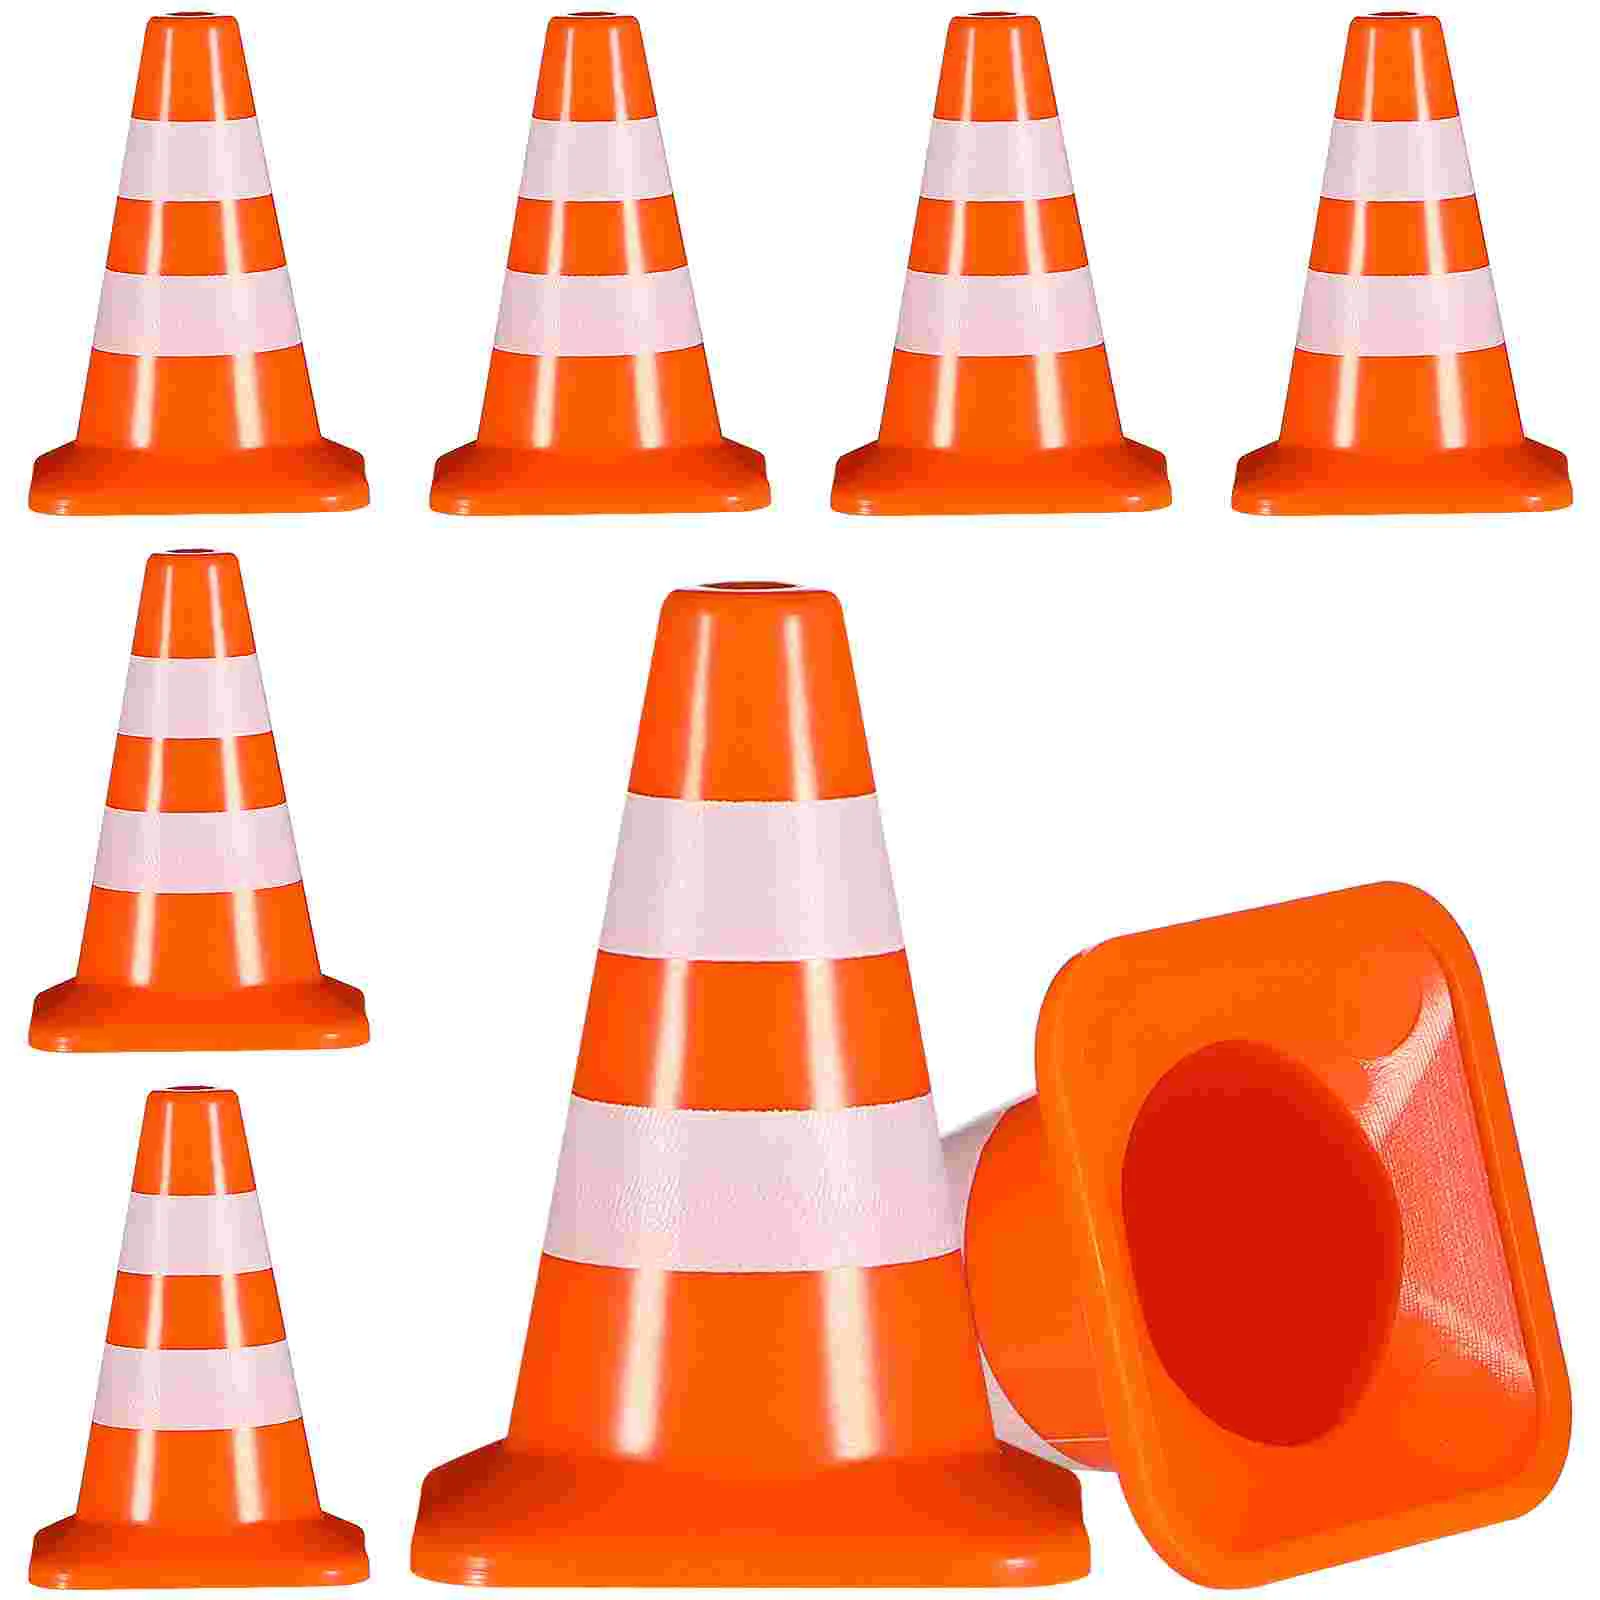 7 Pcs Miniature Traffic Cones Road Construction Cones Kids Plastic Traffic Signs Toys Children Educational Learning Toys Sand